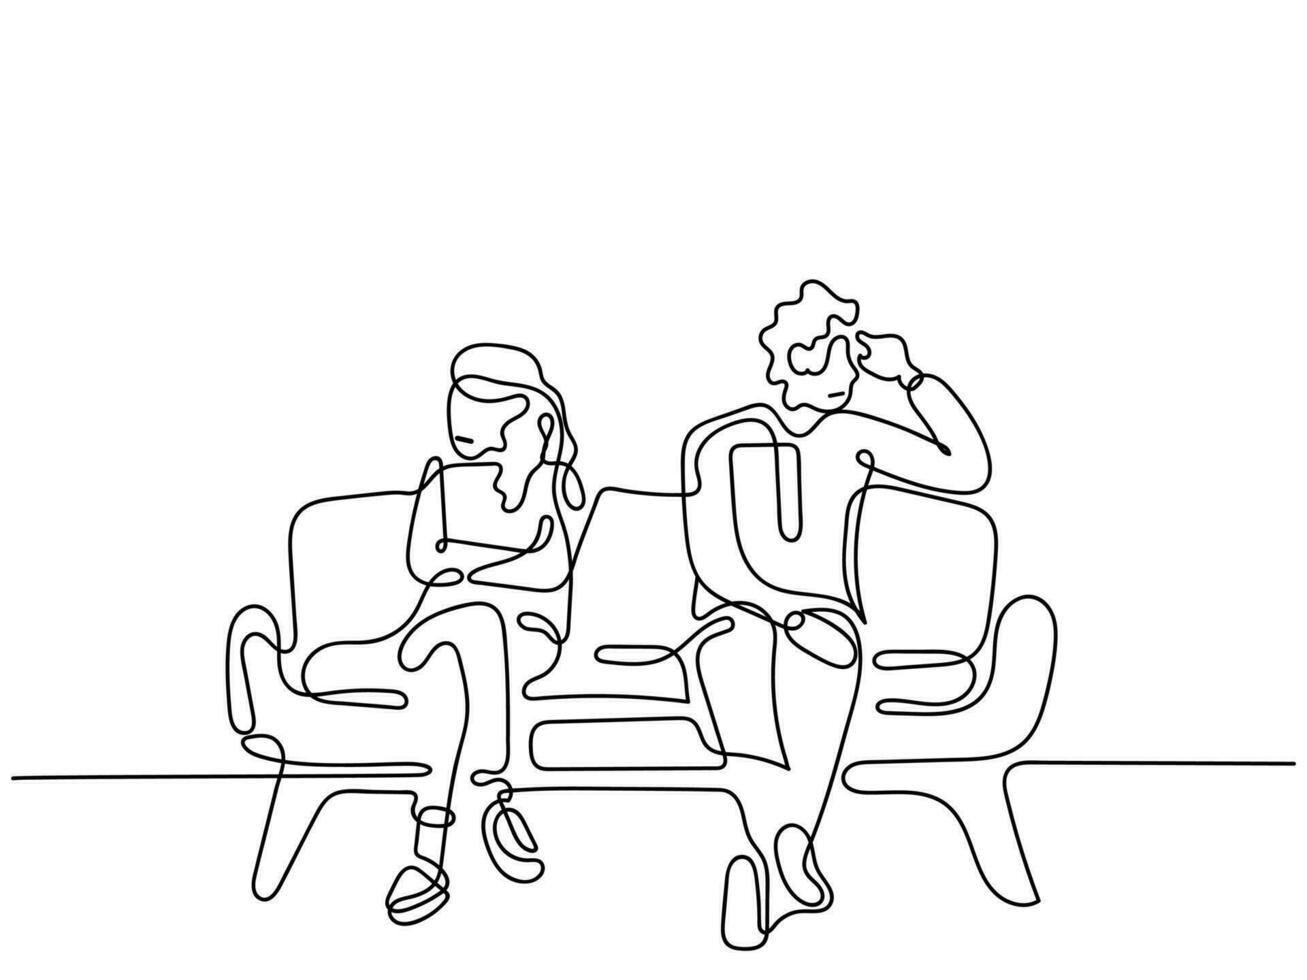 Line art vector of a troubled couple. Couple psychotherapy.